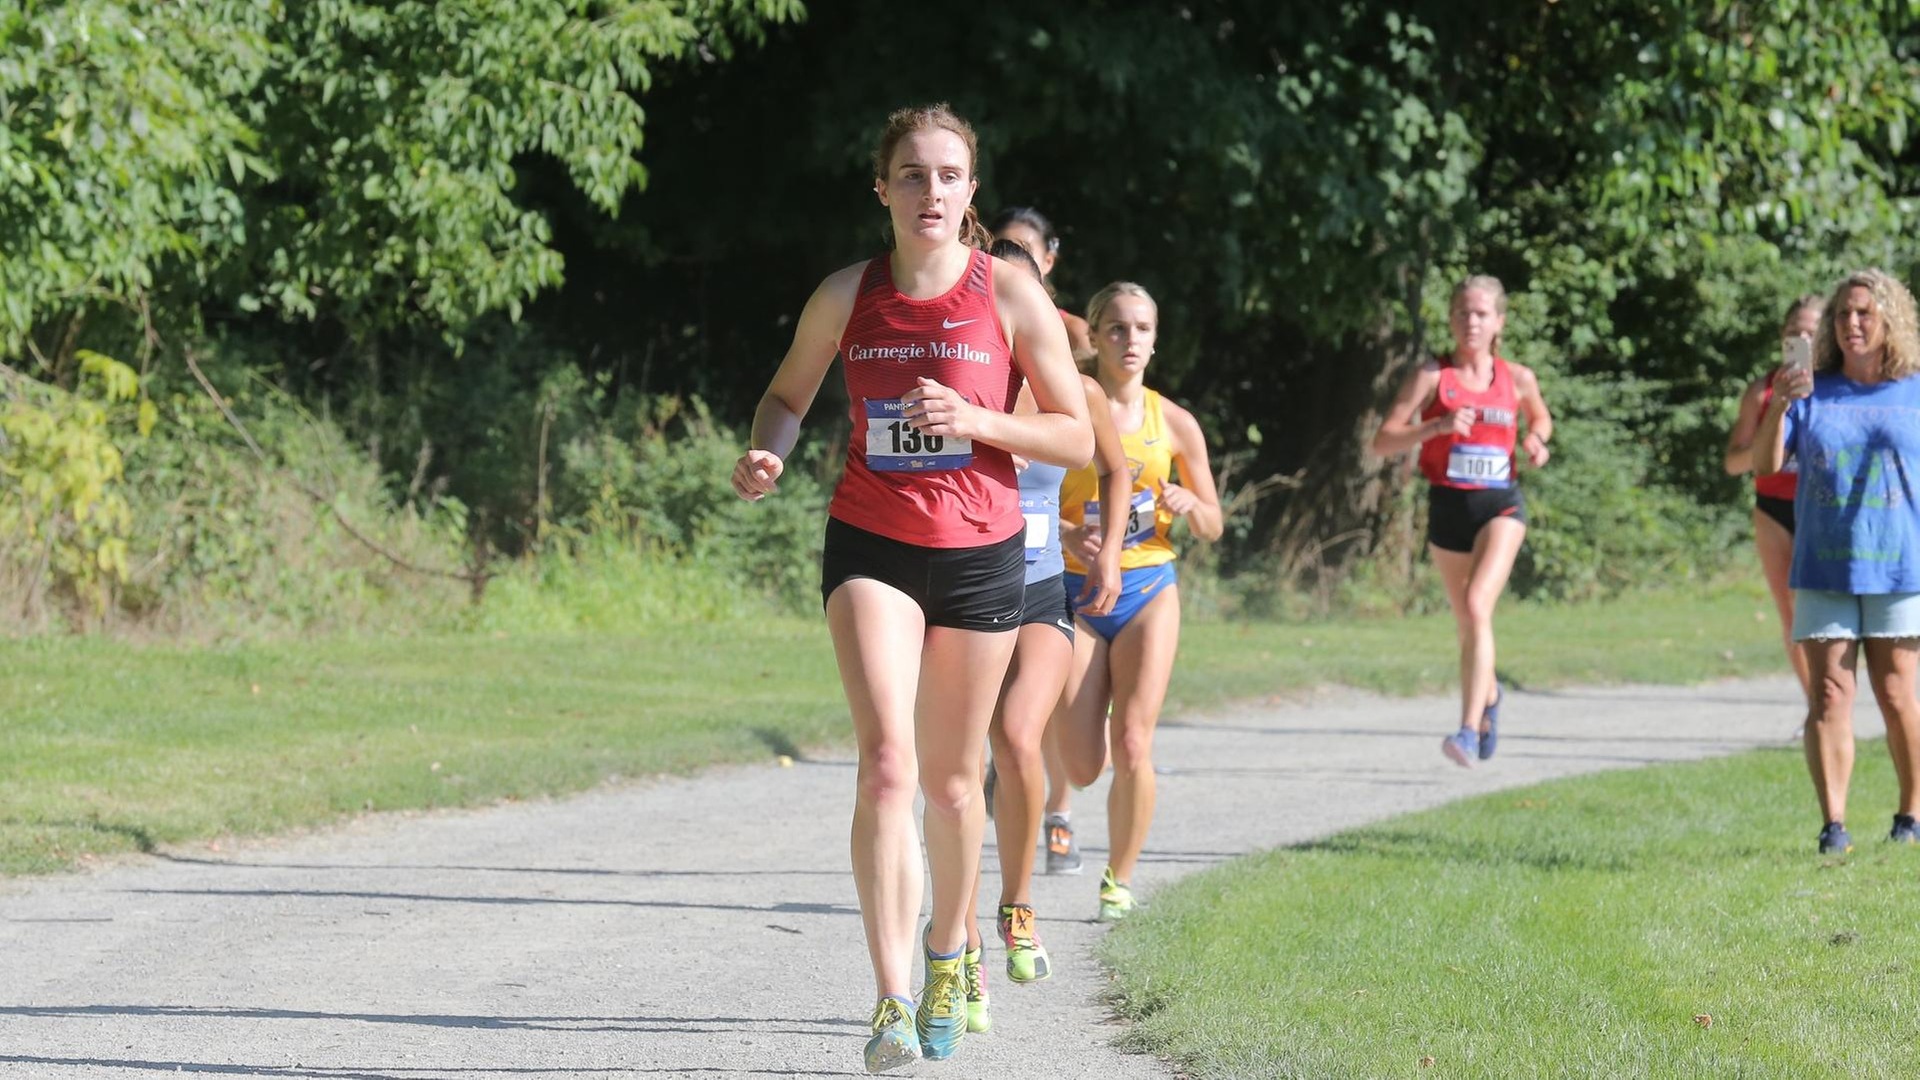 women's cross country runner wearing a red shirt and black shorts leading a group of runners on a trail